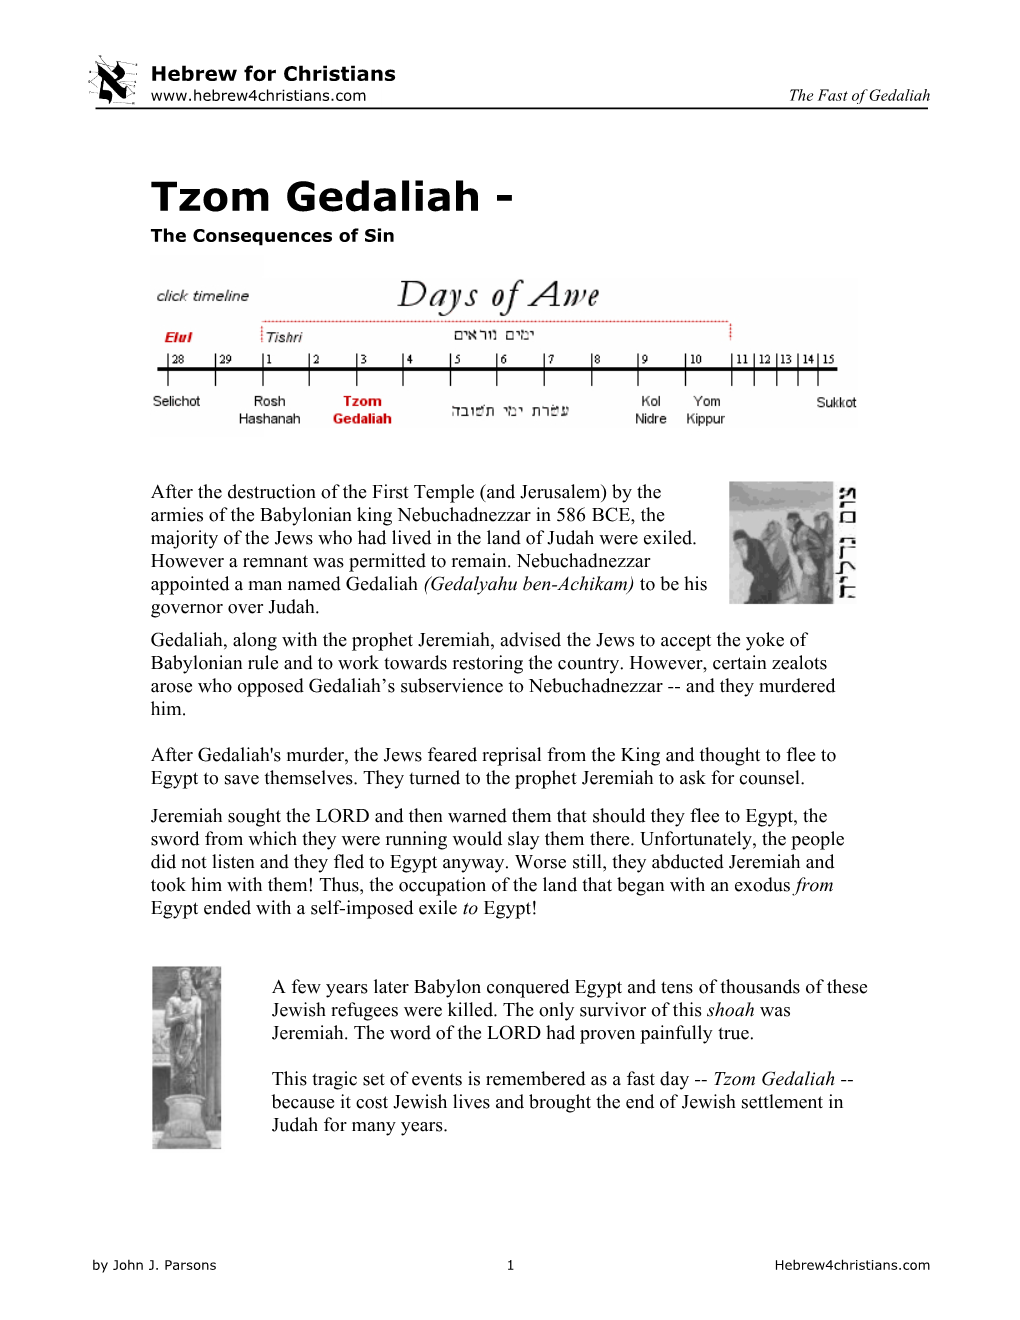 Tzom Gedaliah - the Consequences of Sin